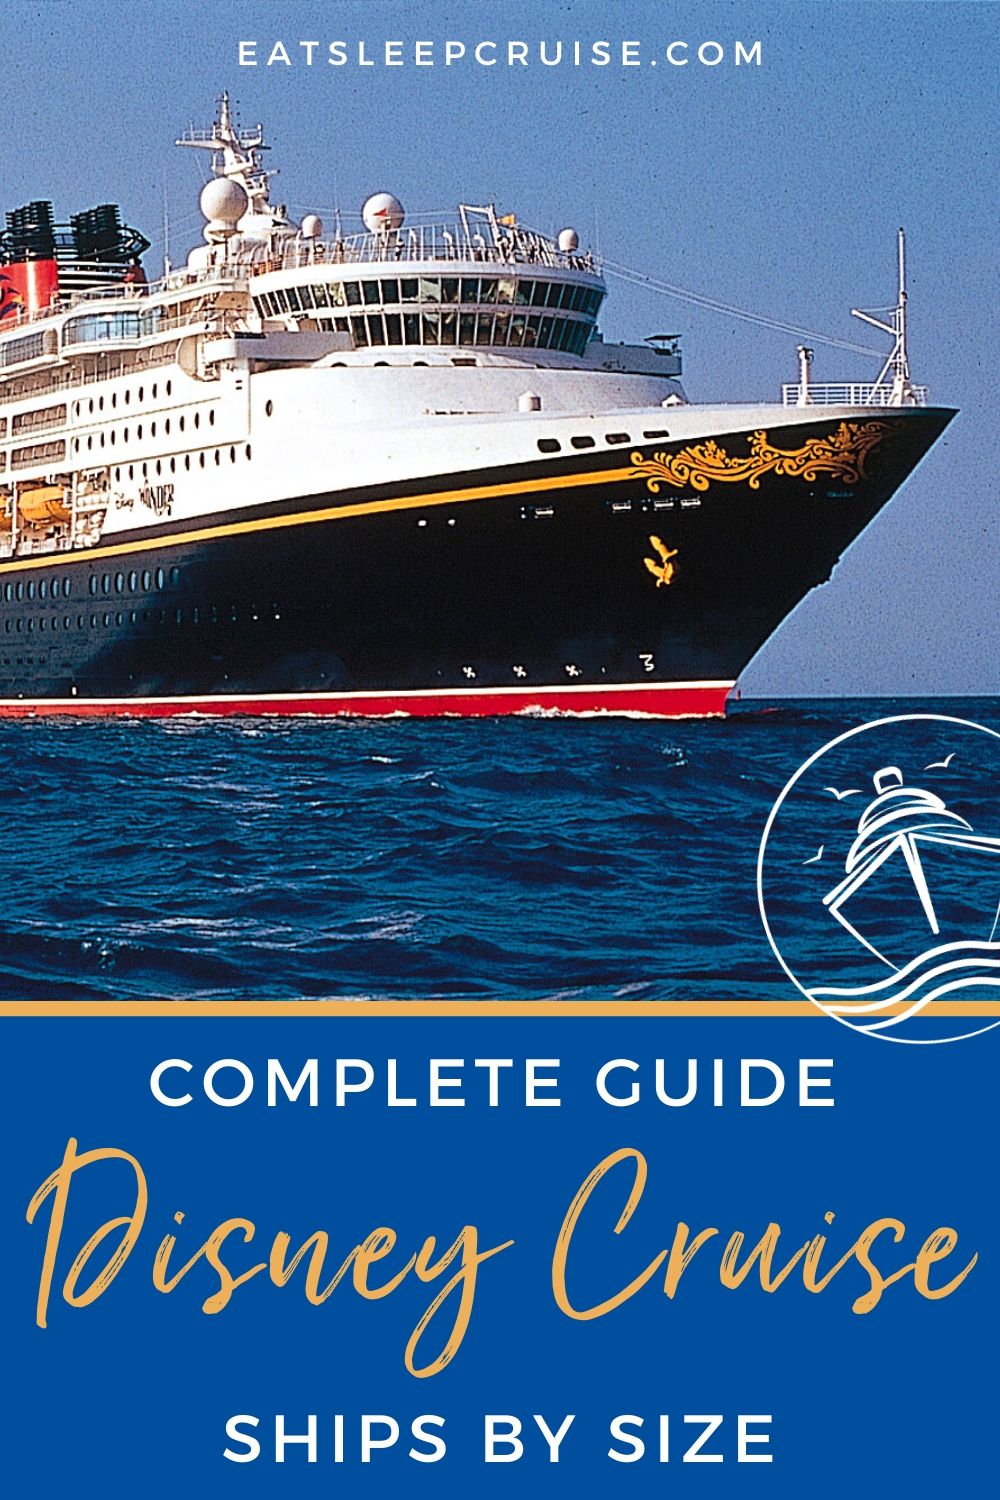 Complete Guide to Disney Cruise Ships By Size